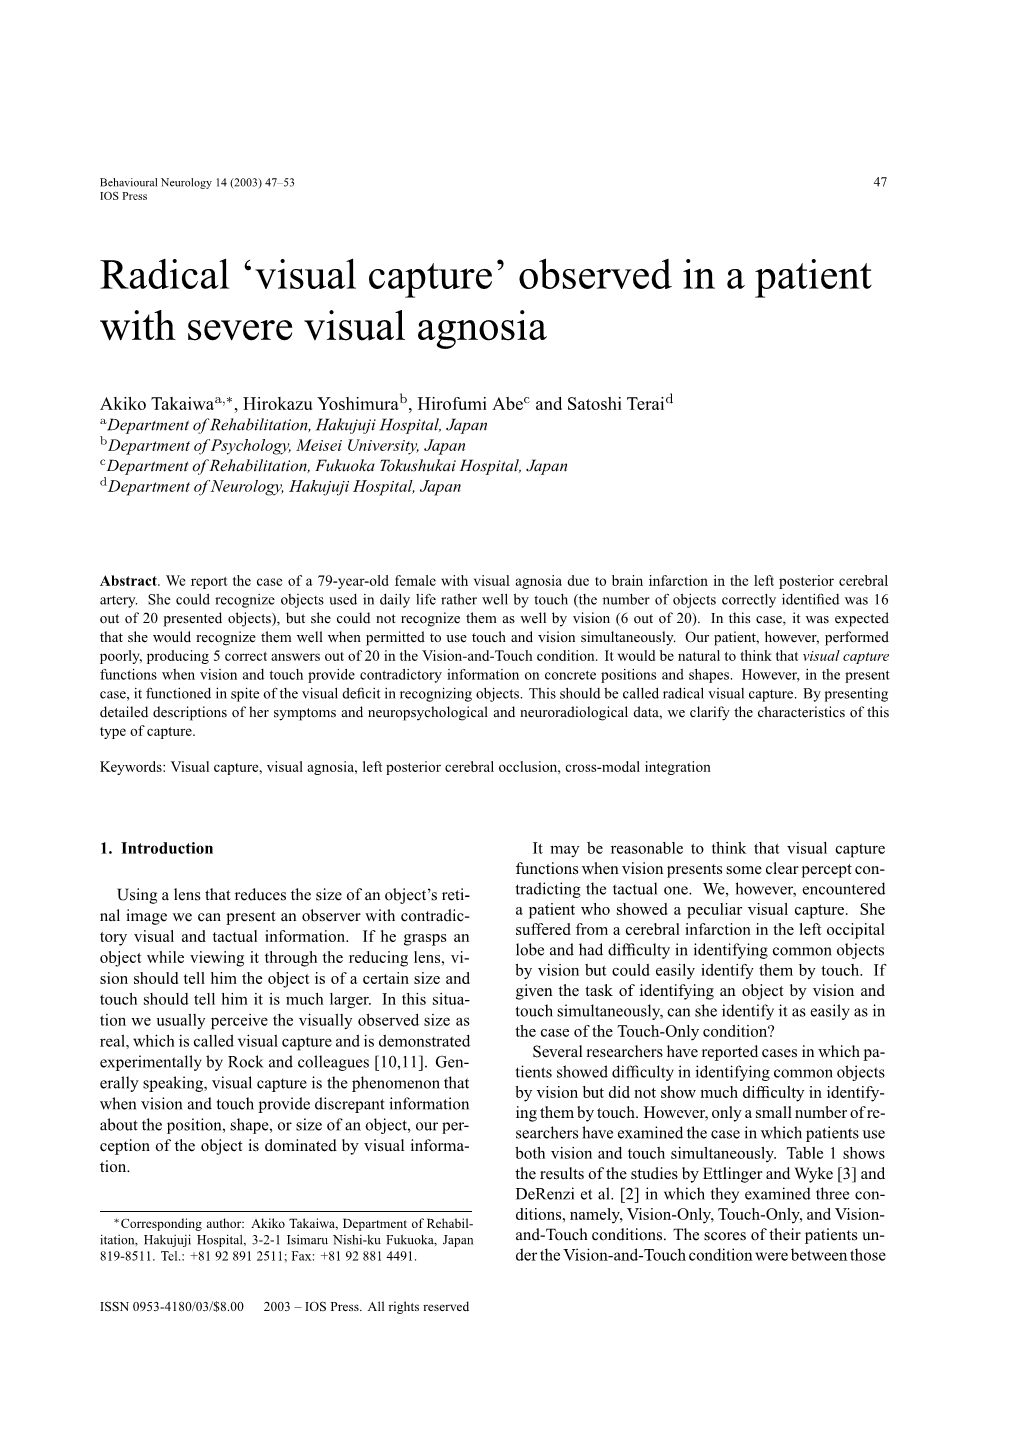 Radical 'Visual Capture' Observed in a Patient